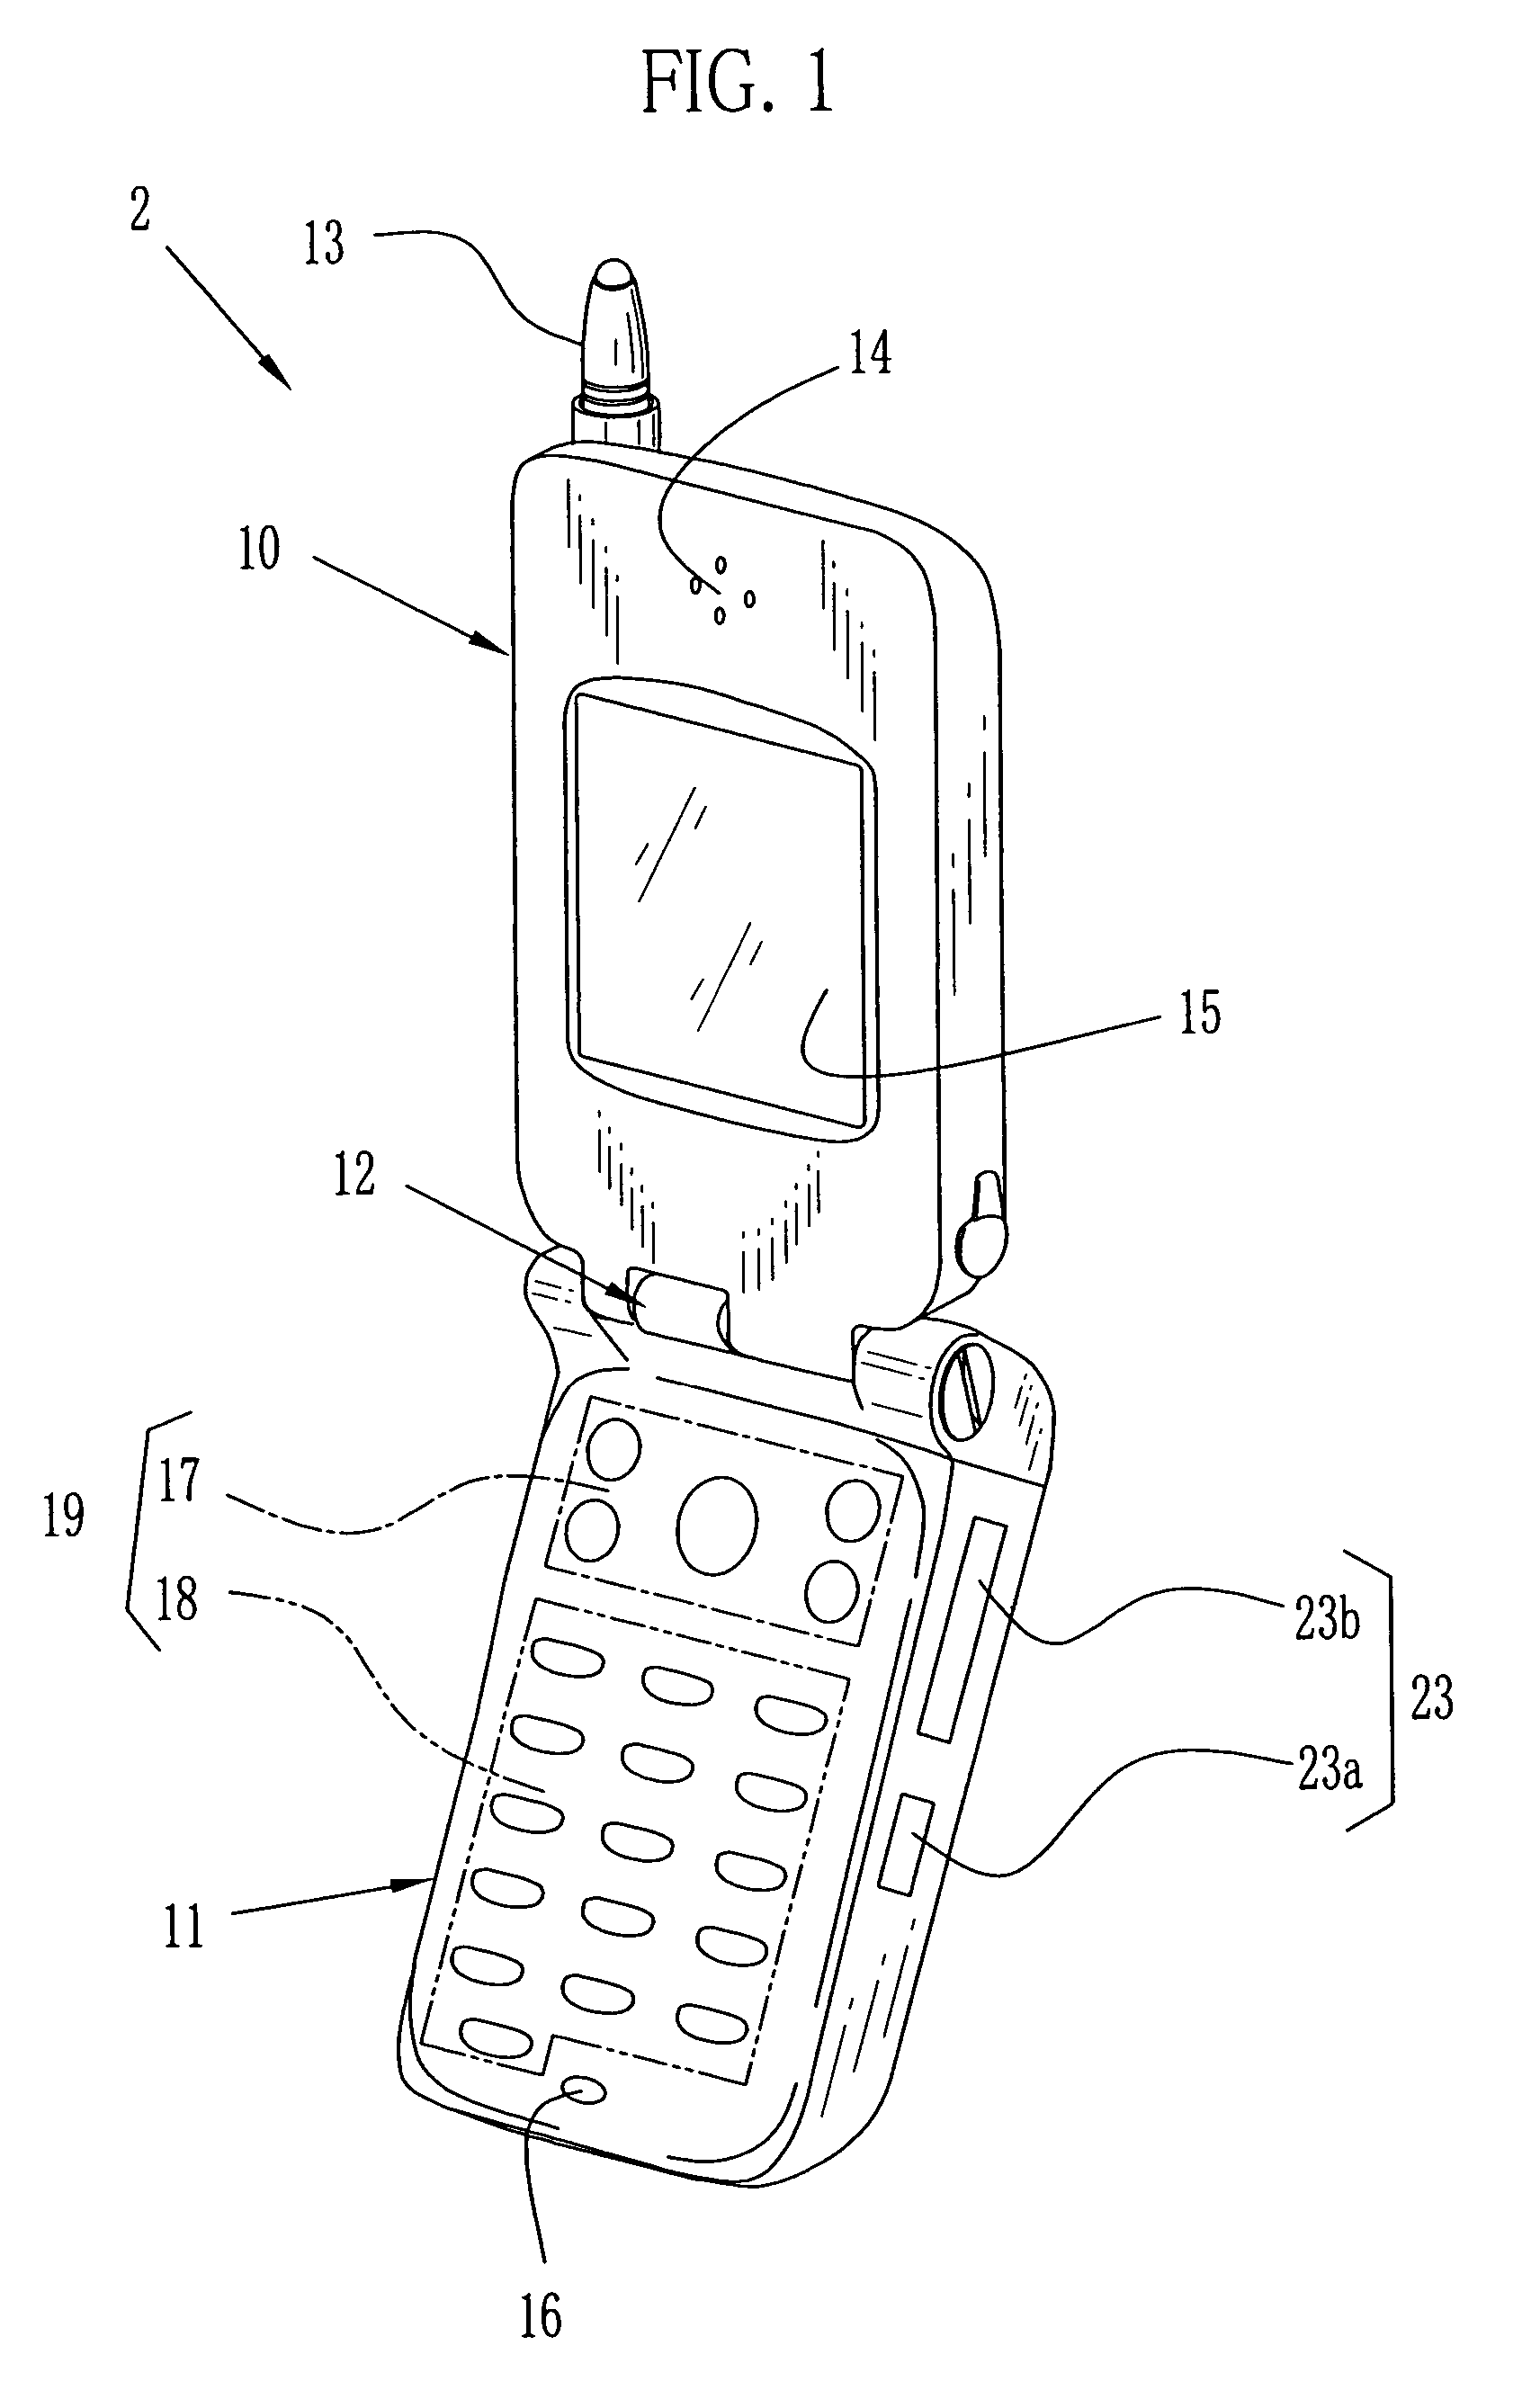 Cell phone having an information-converting function